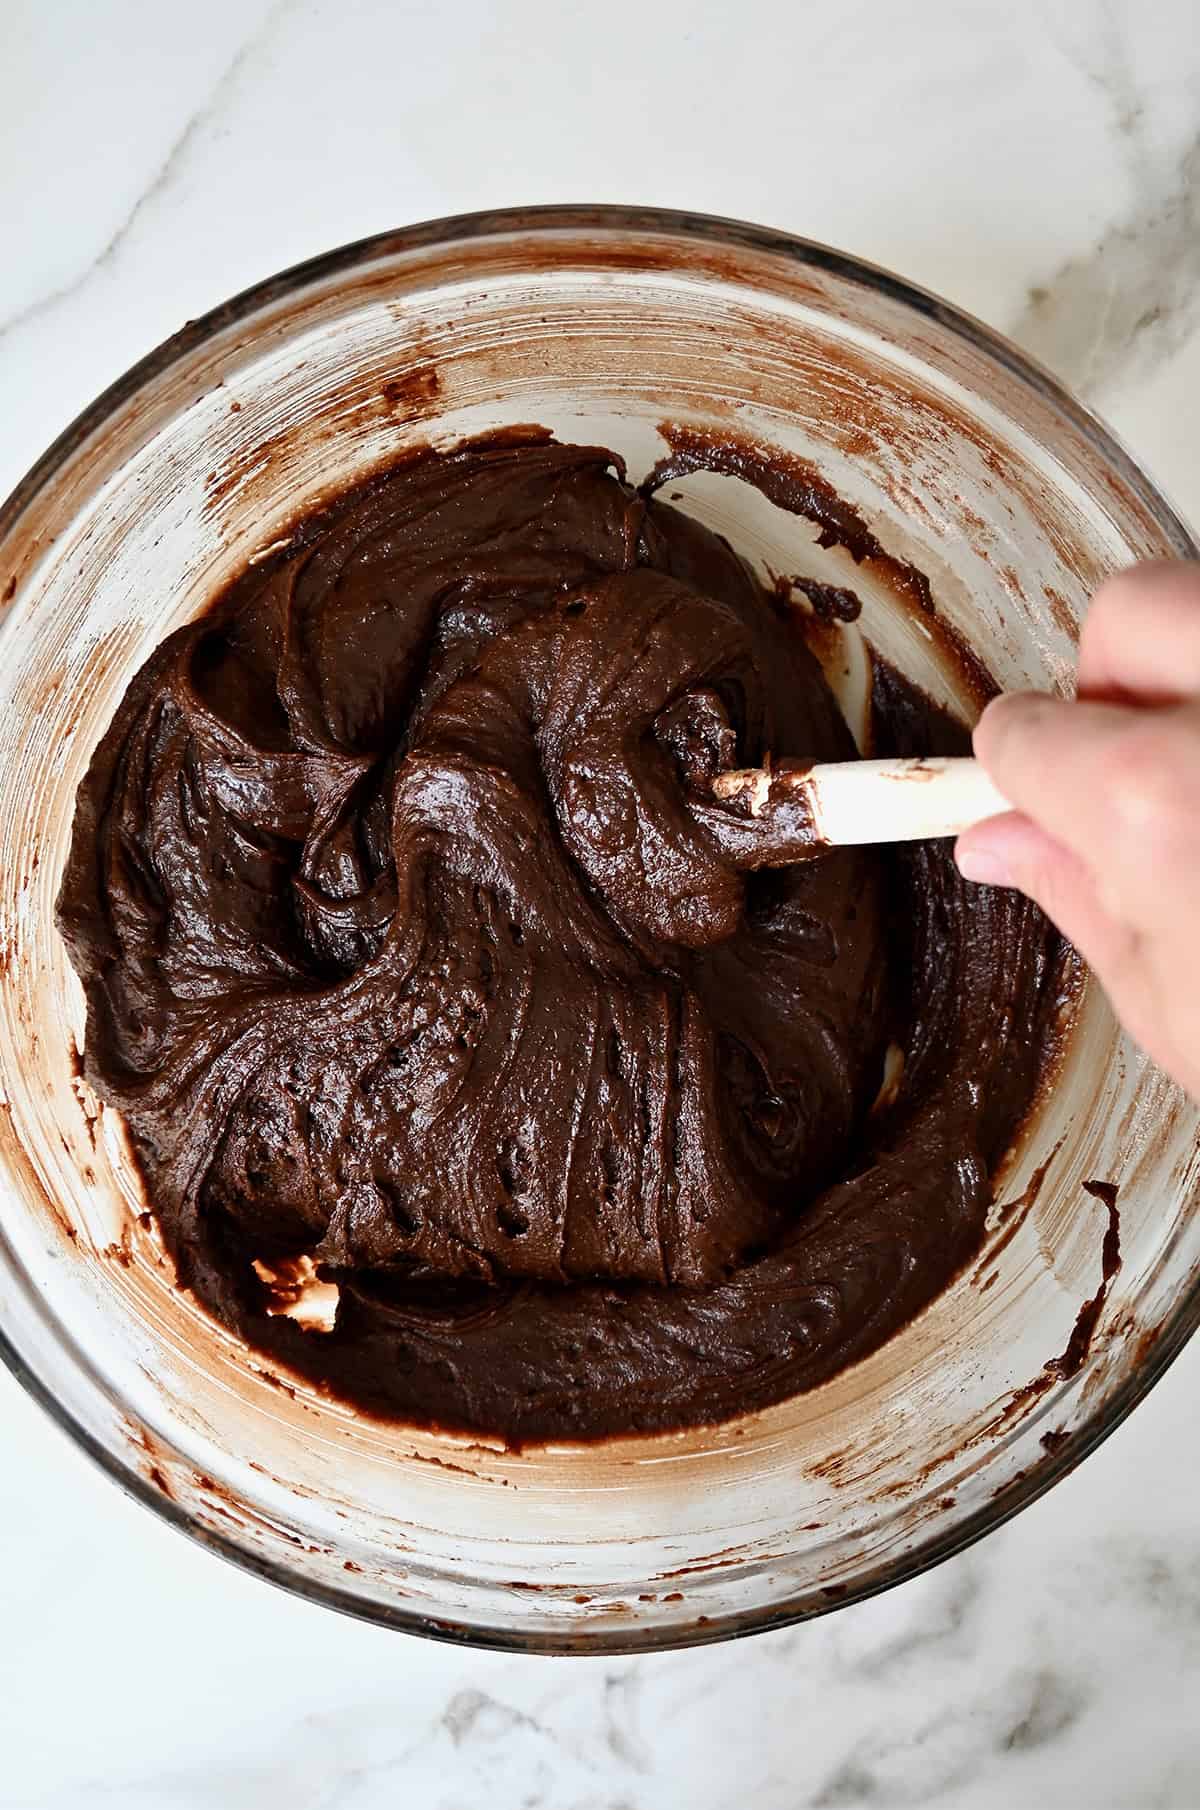 Brownie batter is being mixed with a spatula in a glass bowl.